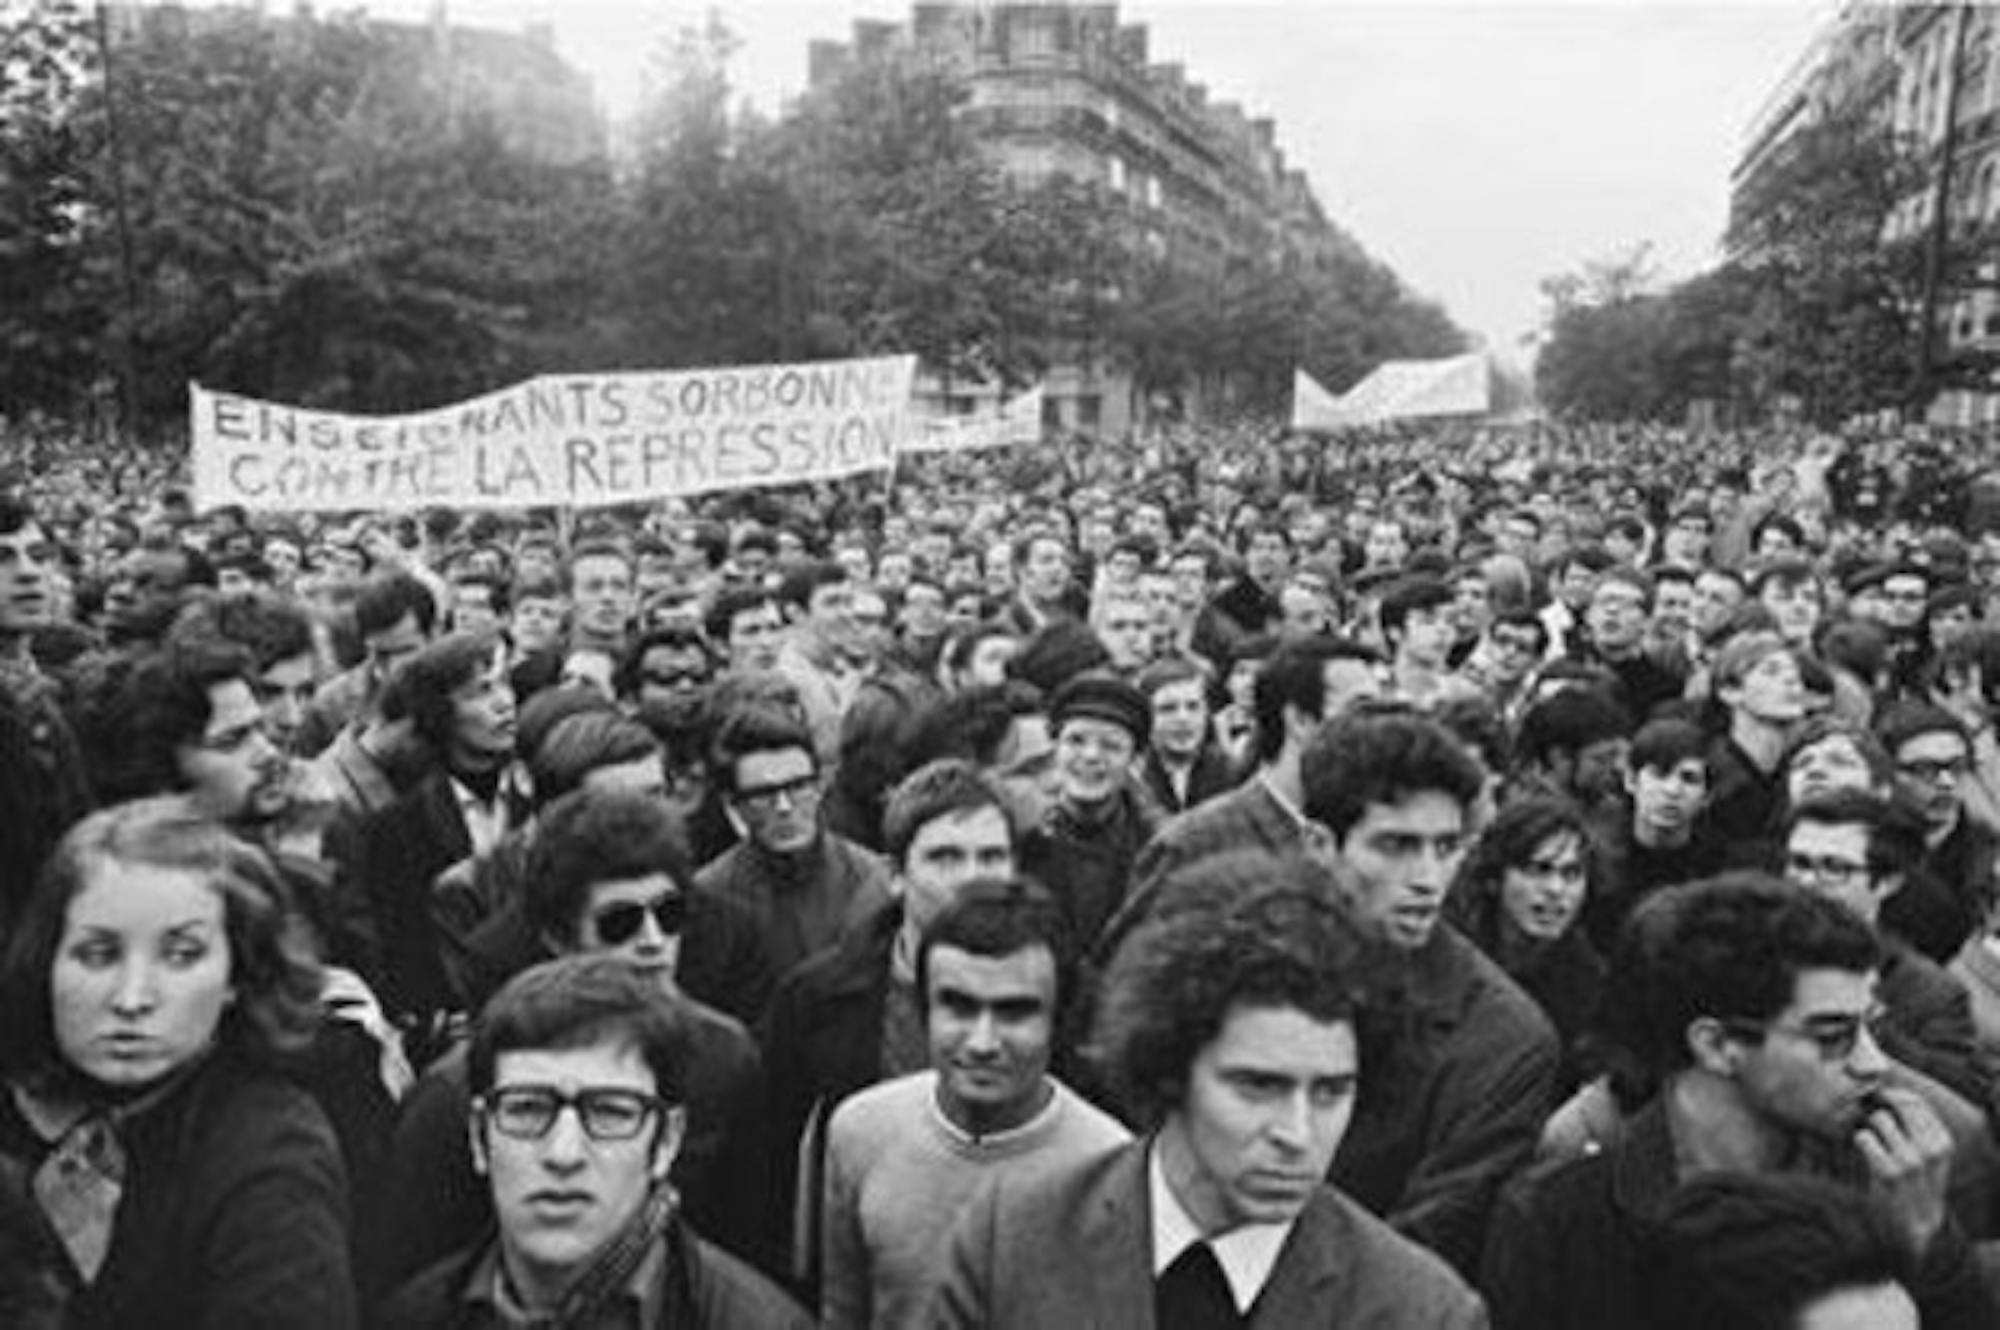 In this photograph, Strambourg captures a crowd of marching protestors holding a sign that reads 